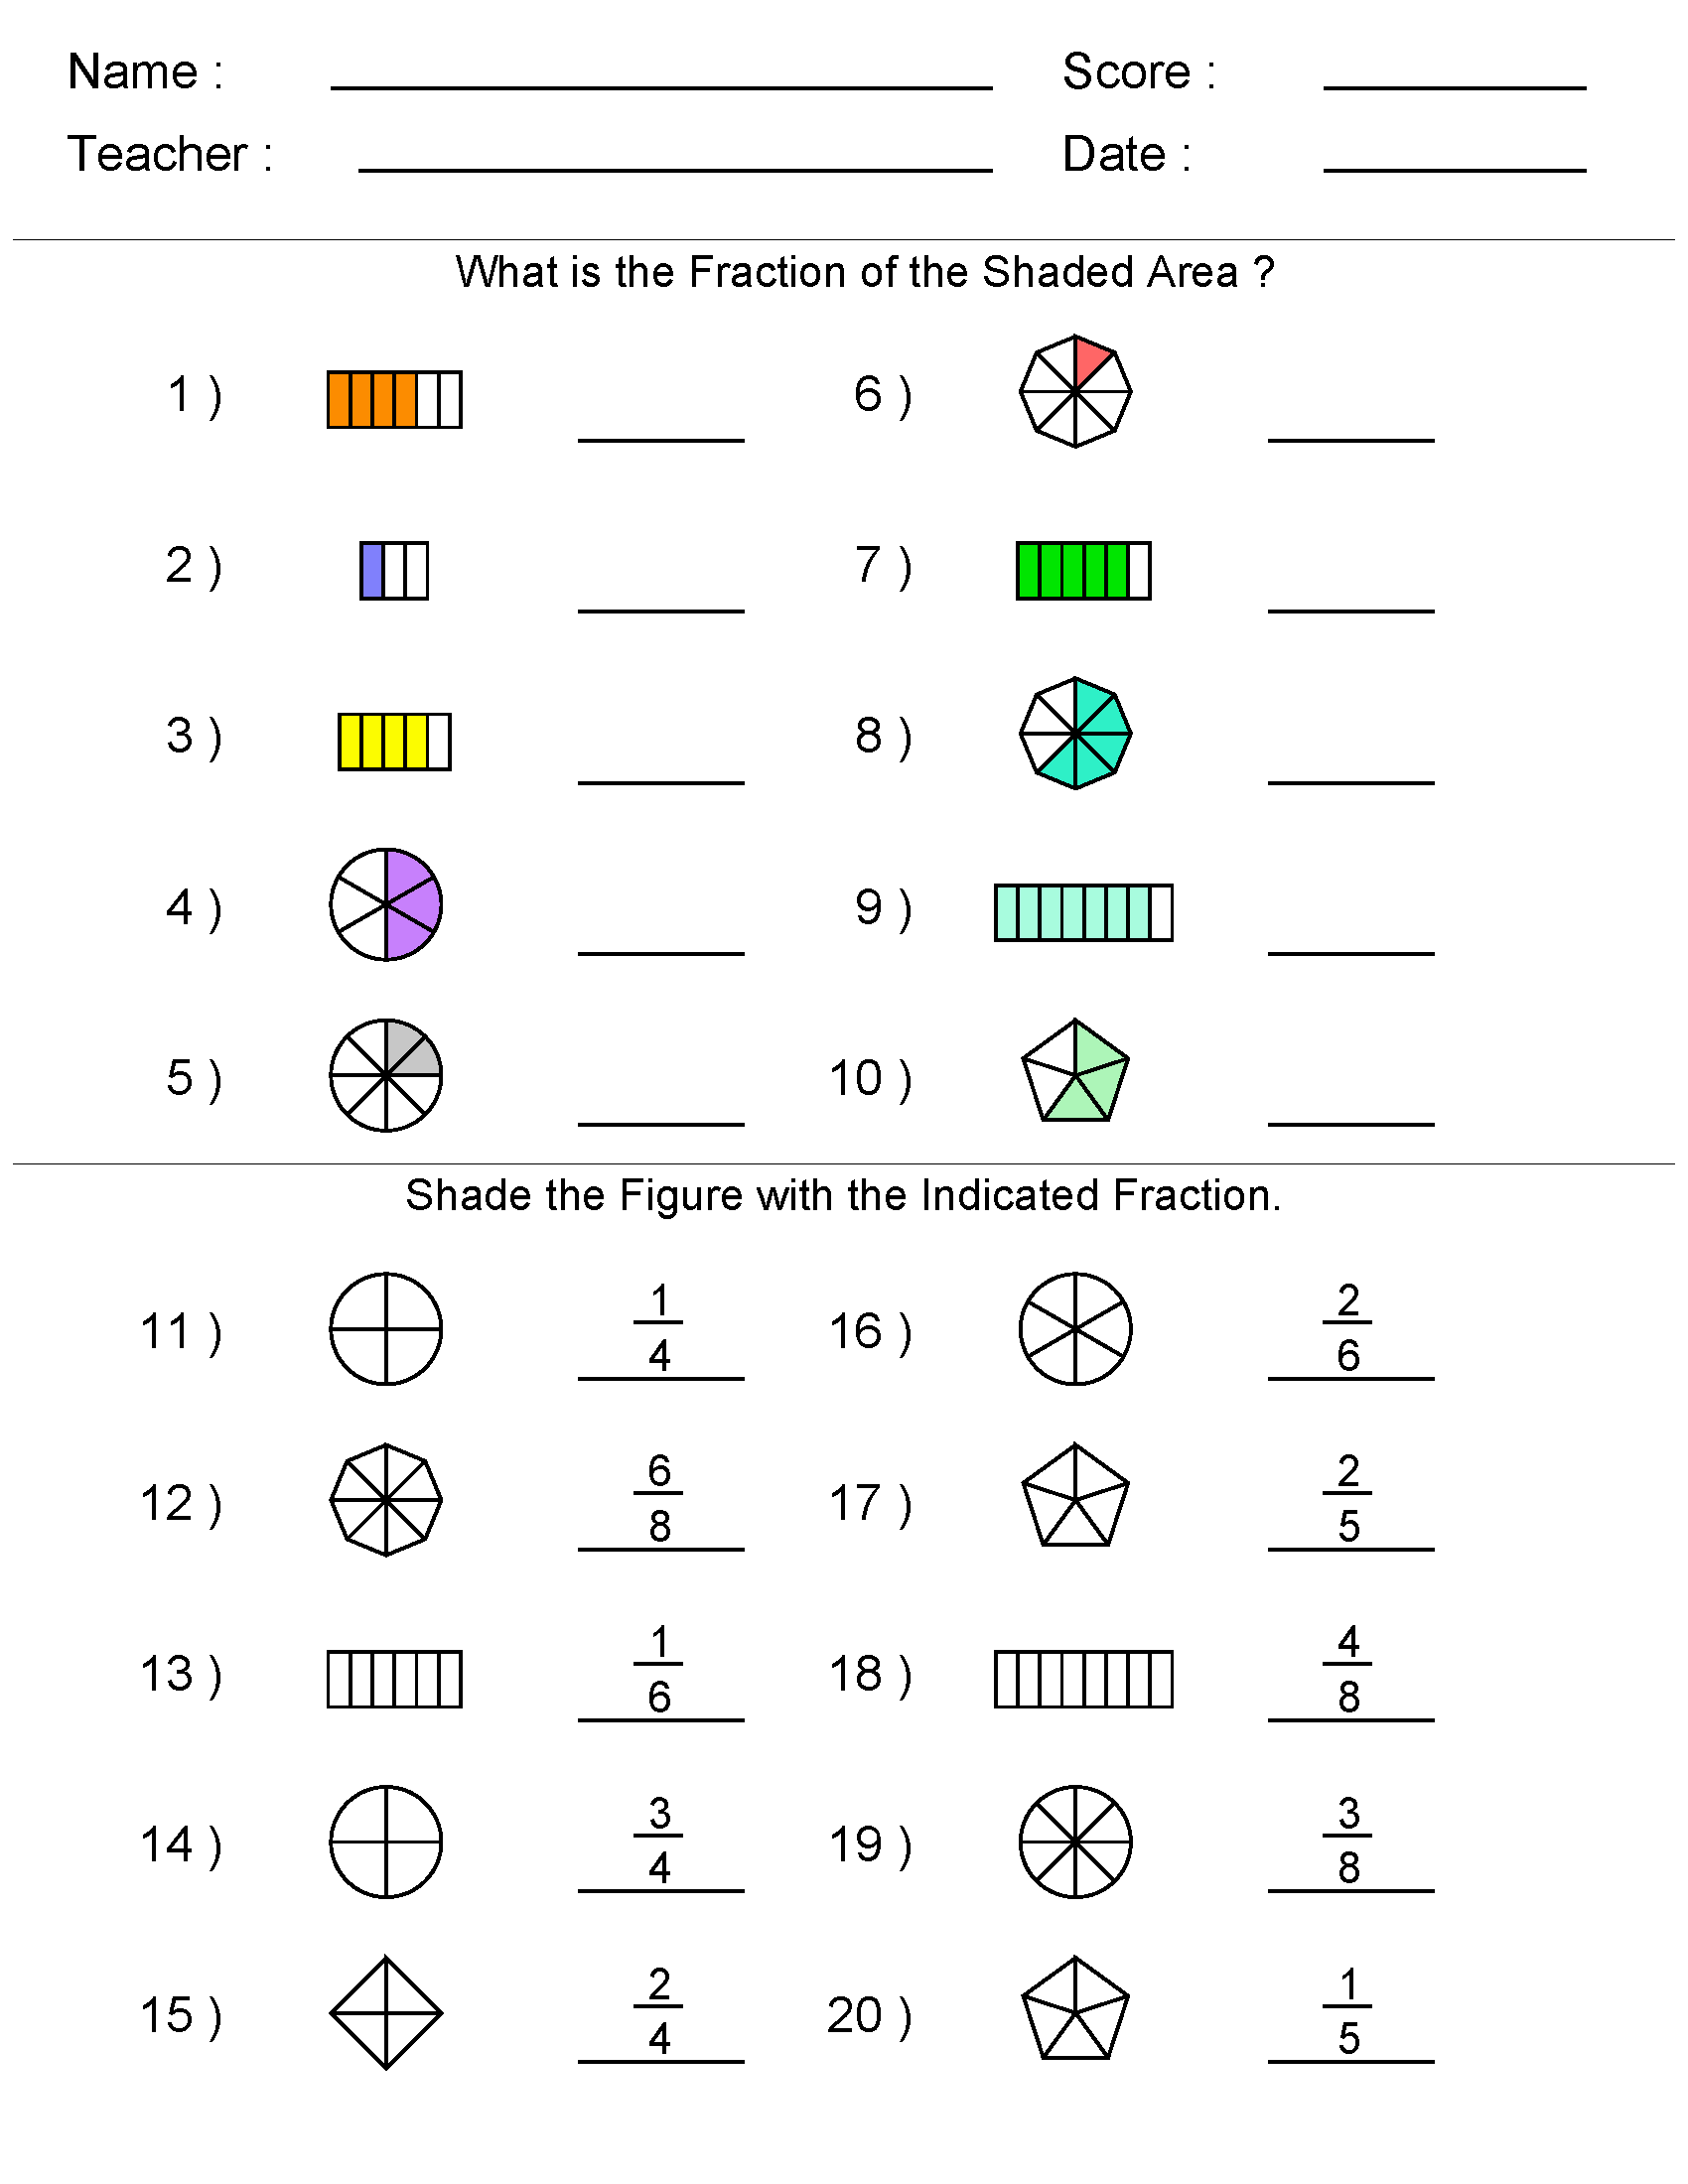 Fractions worksheets indicated